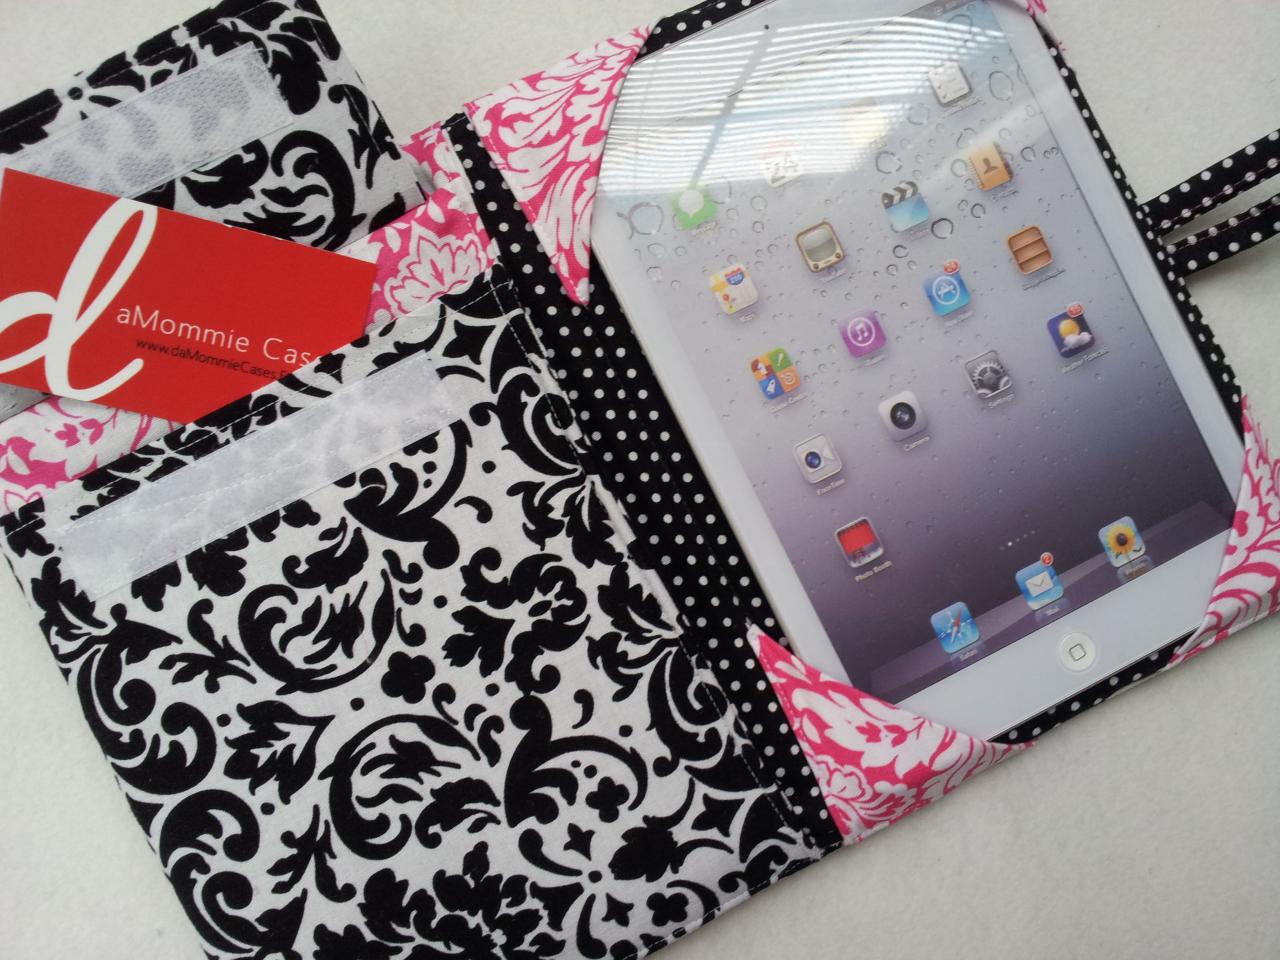 Ipad Mini Case Nook Color, Nook, Nook Hd, Kindle Fire Hd, Kindle Keyboard, Kindle Fire Made To Order